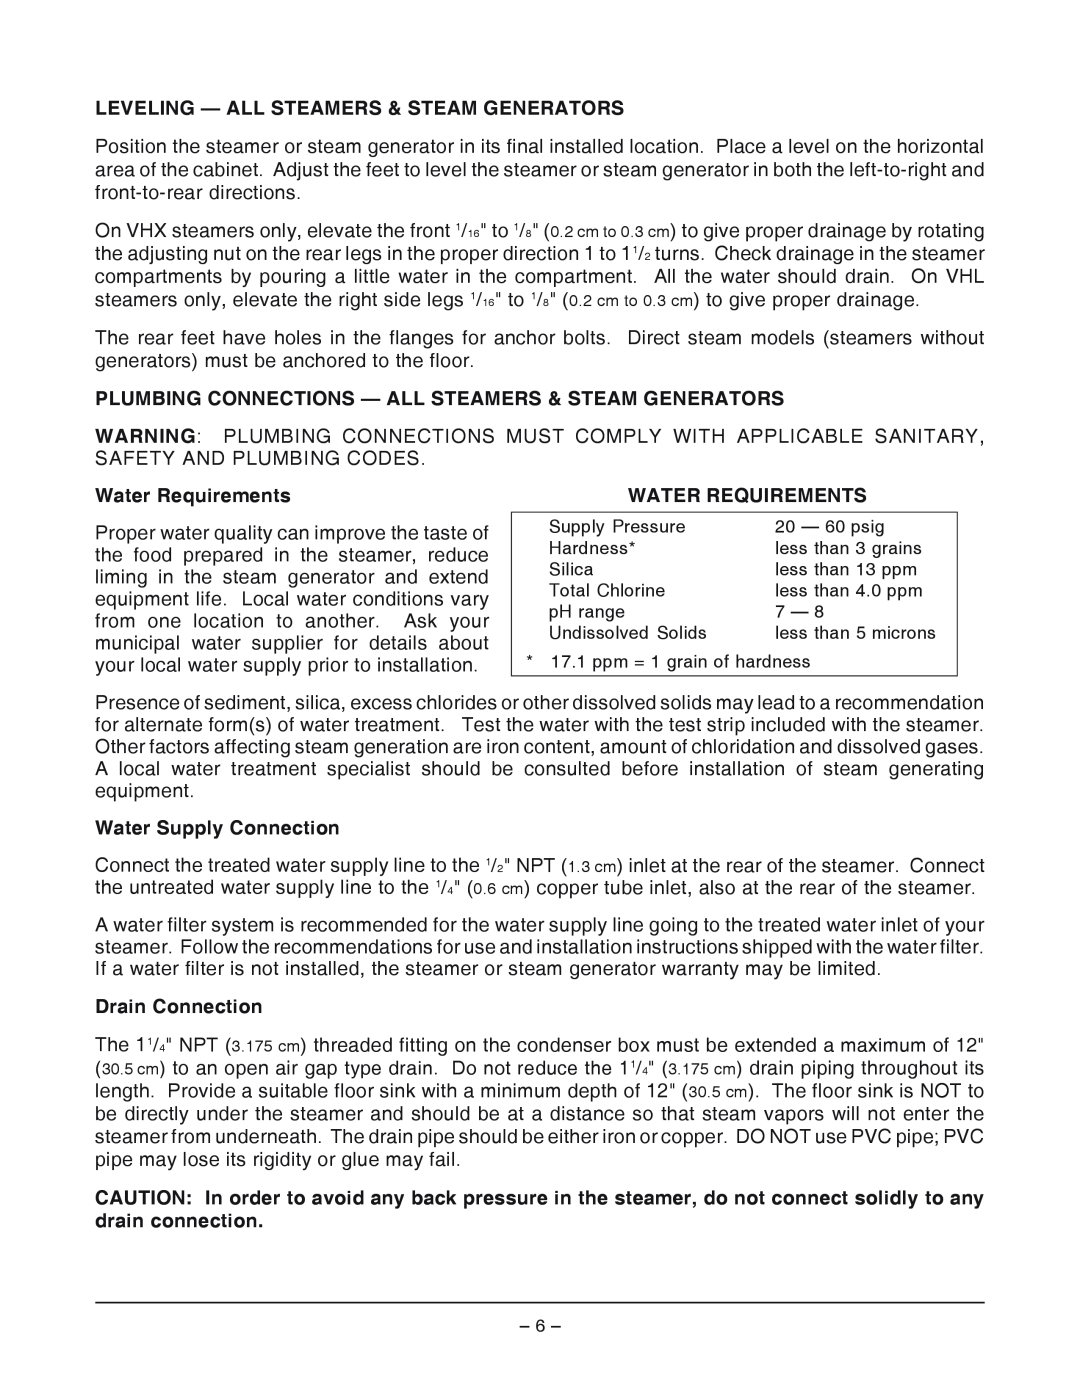 Vulcan-Hart VHL2G operation manual Leveling - All Steamers & Steam Generators, Water Requirements, Water Supply Connection 